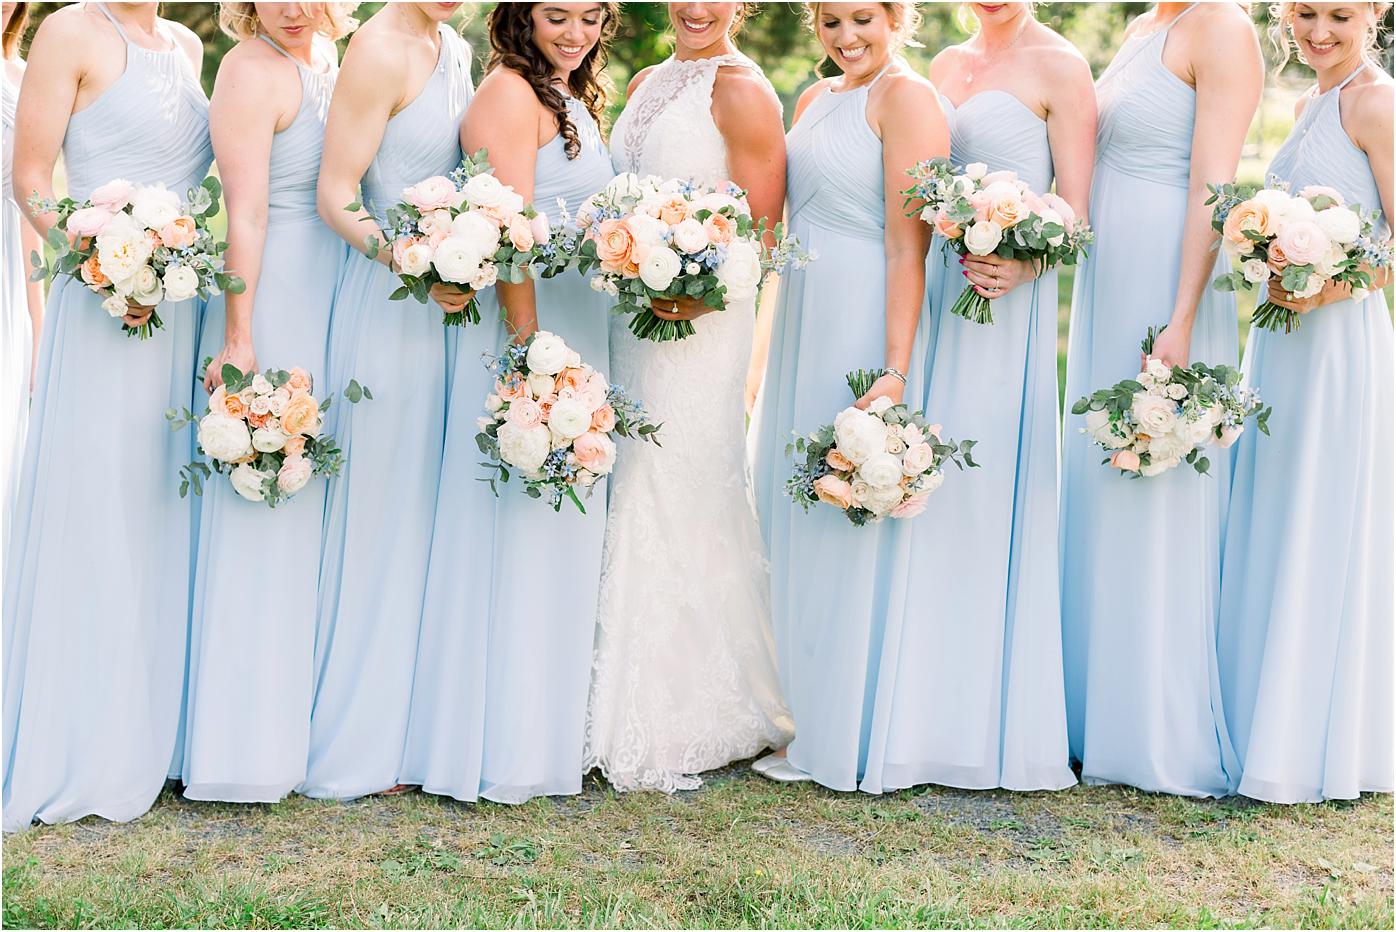 bridesmaids in sky blue dresses holding peach, blush, ivory florals with greenery bouquets